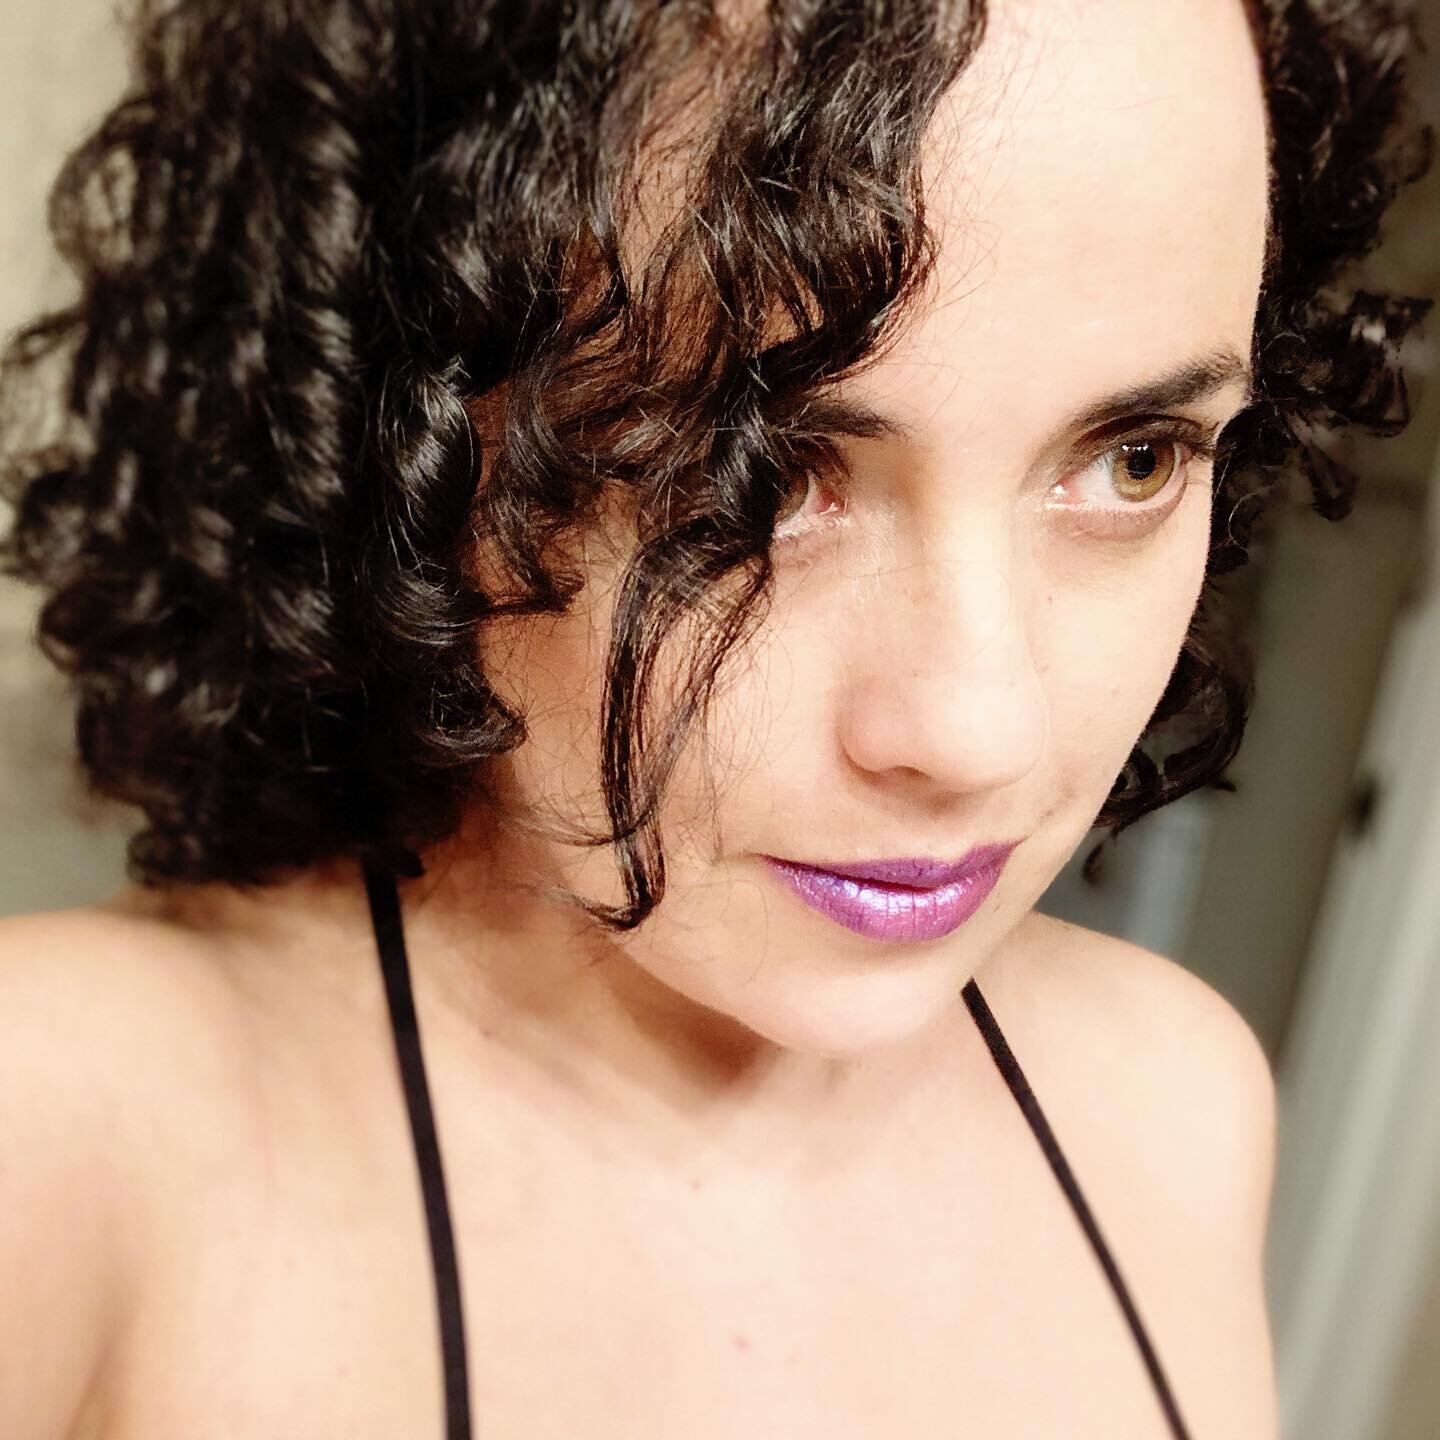 Si, amo mis crespos 🙌🏻 revolución post cuarentena 😬  #naturallyborncurly #naturalhair . #postquarantine  #loveyourself &bull; Loving my curly nature, the good things after the lock-down. 🌈